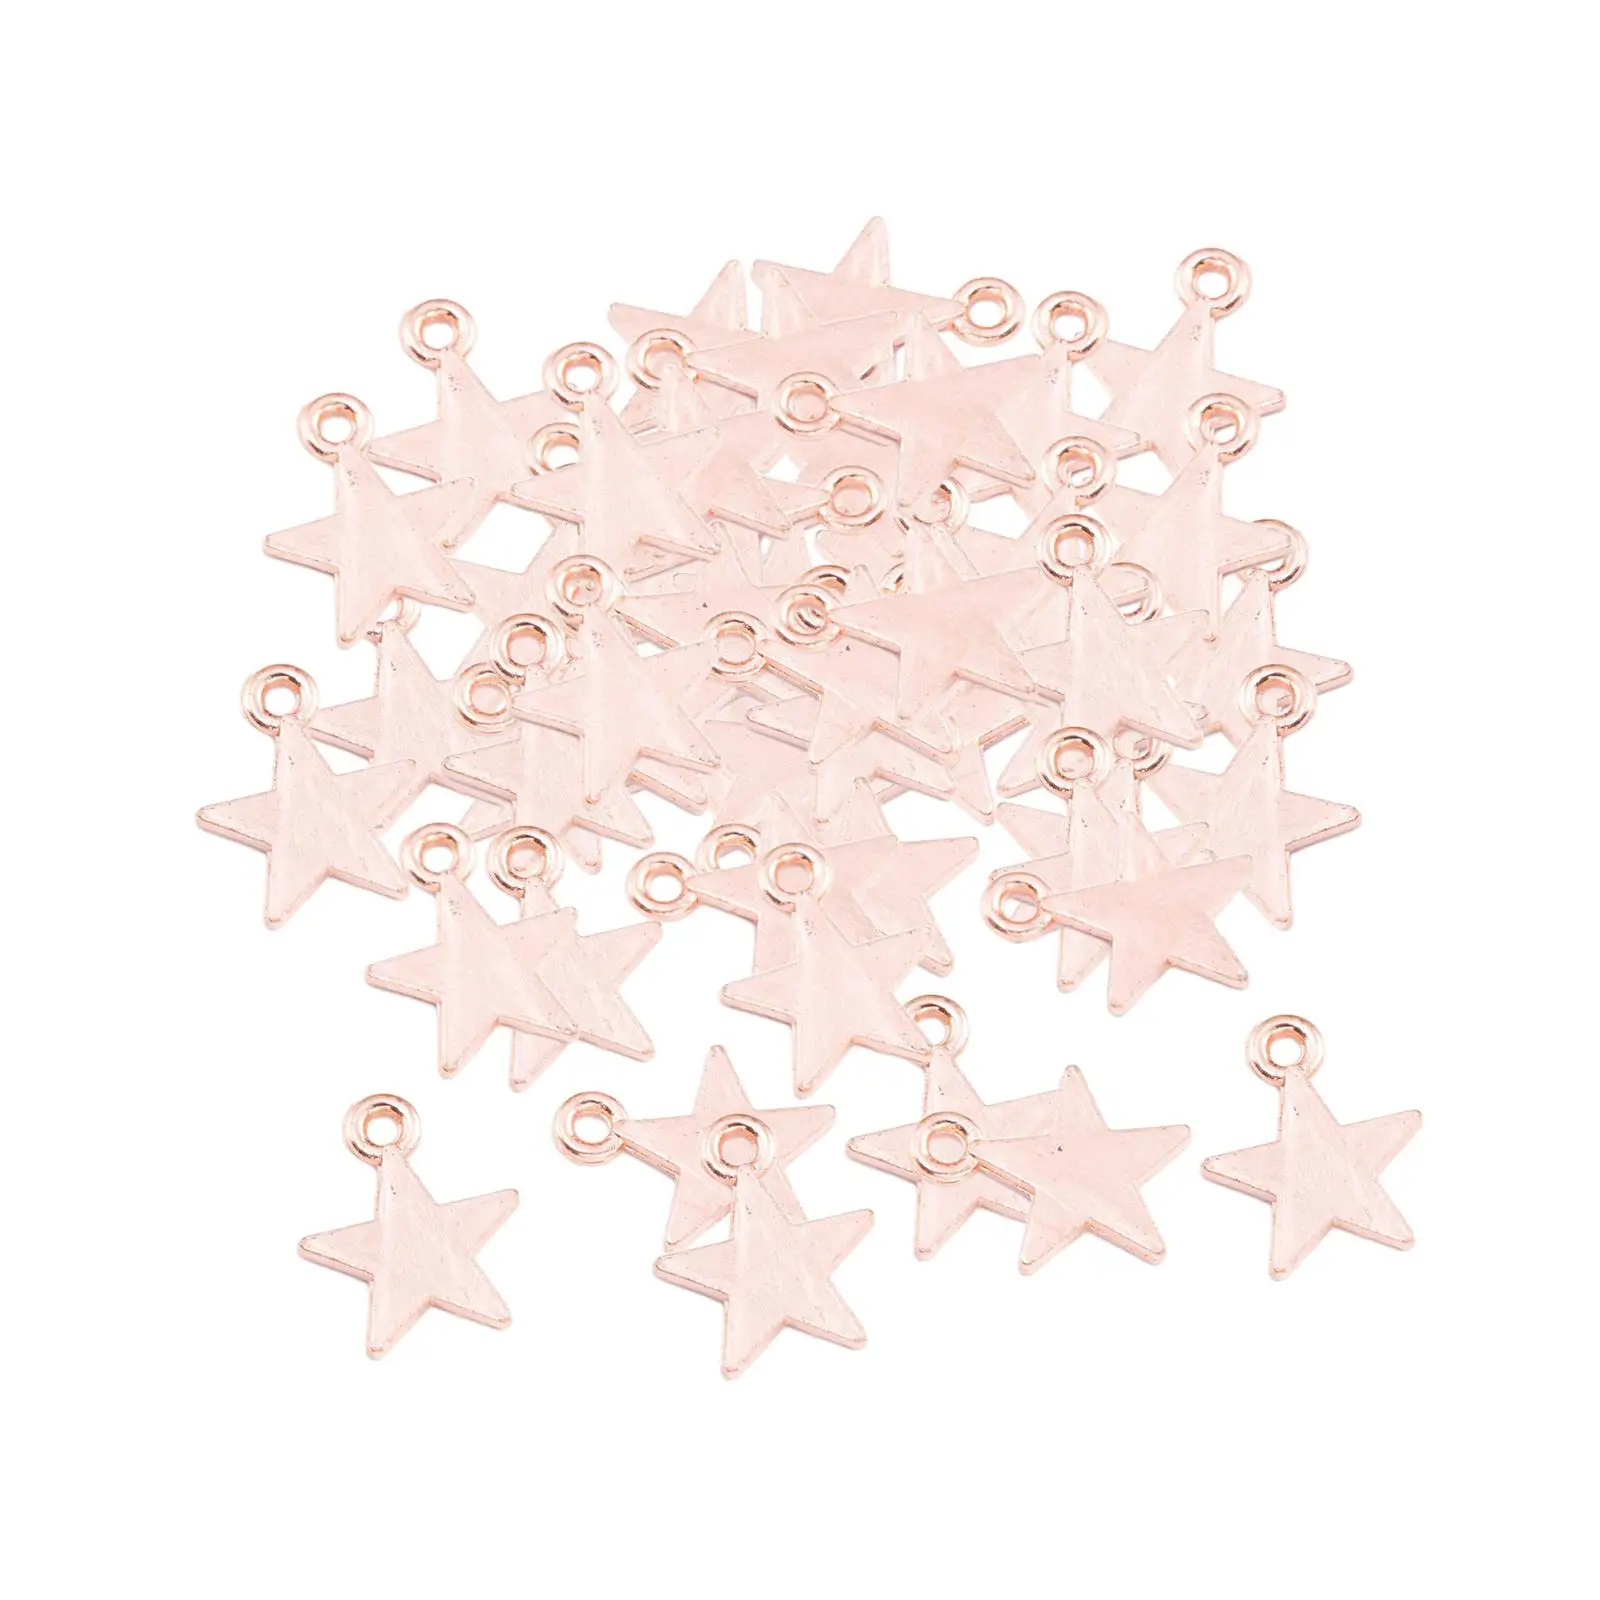 50 Pieces Star Charms Exquisite Creative Jewelry Making for DIY Bag Crafting